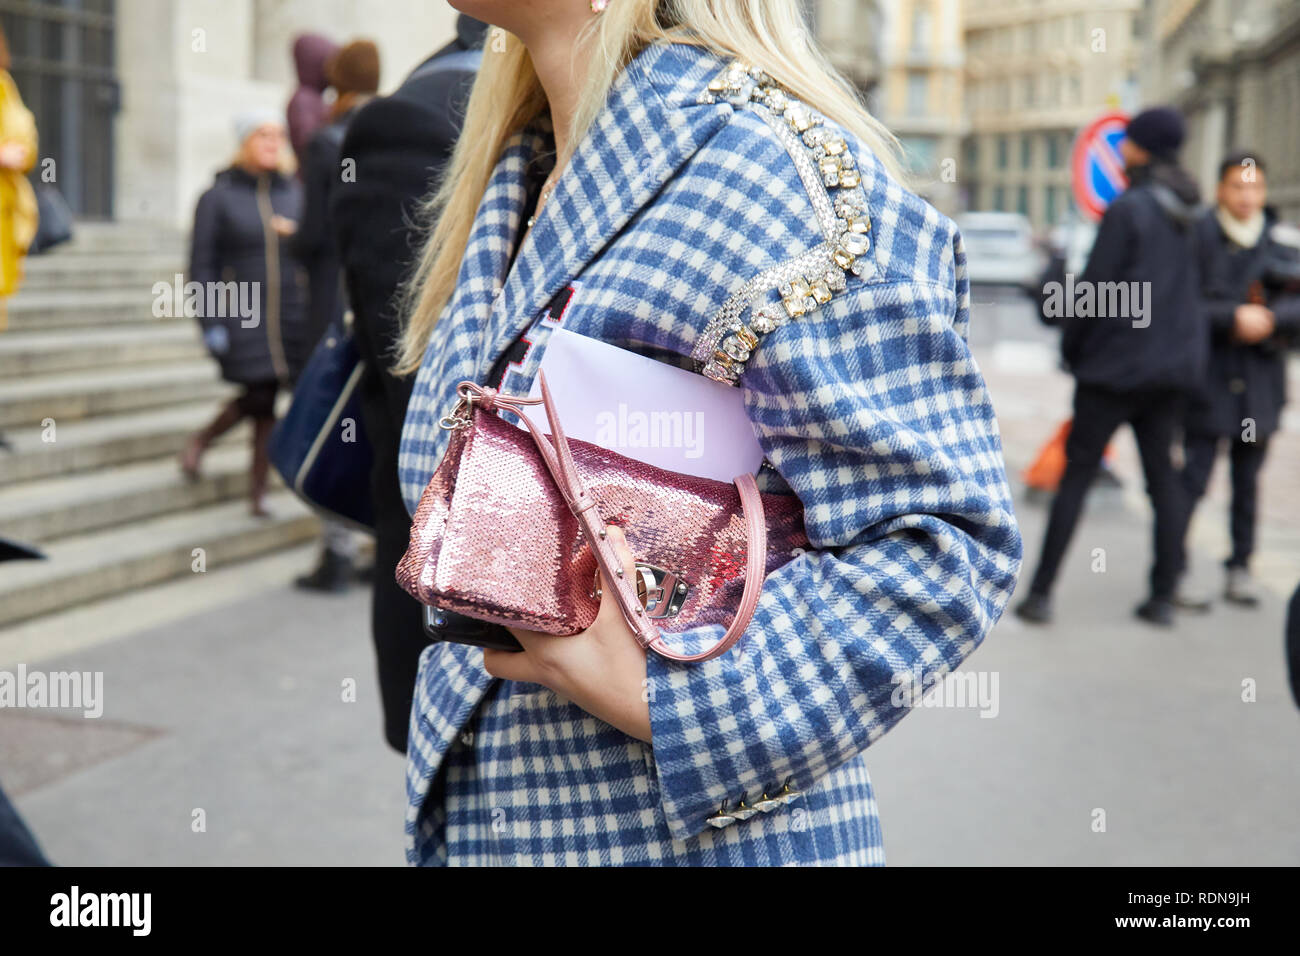 MILAN, ITALY - JANUARY 12, 2019: Woman with pink sequin bag and blue and white checkered jacket before Frankie Morello fashion show, Milan Fashion Wee Stock Photo